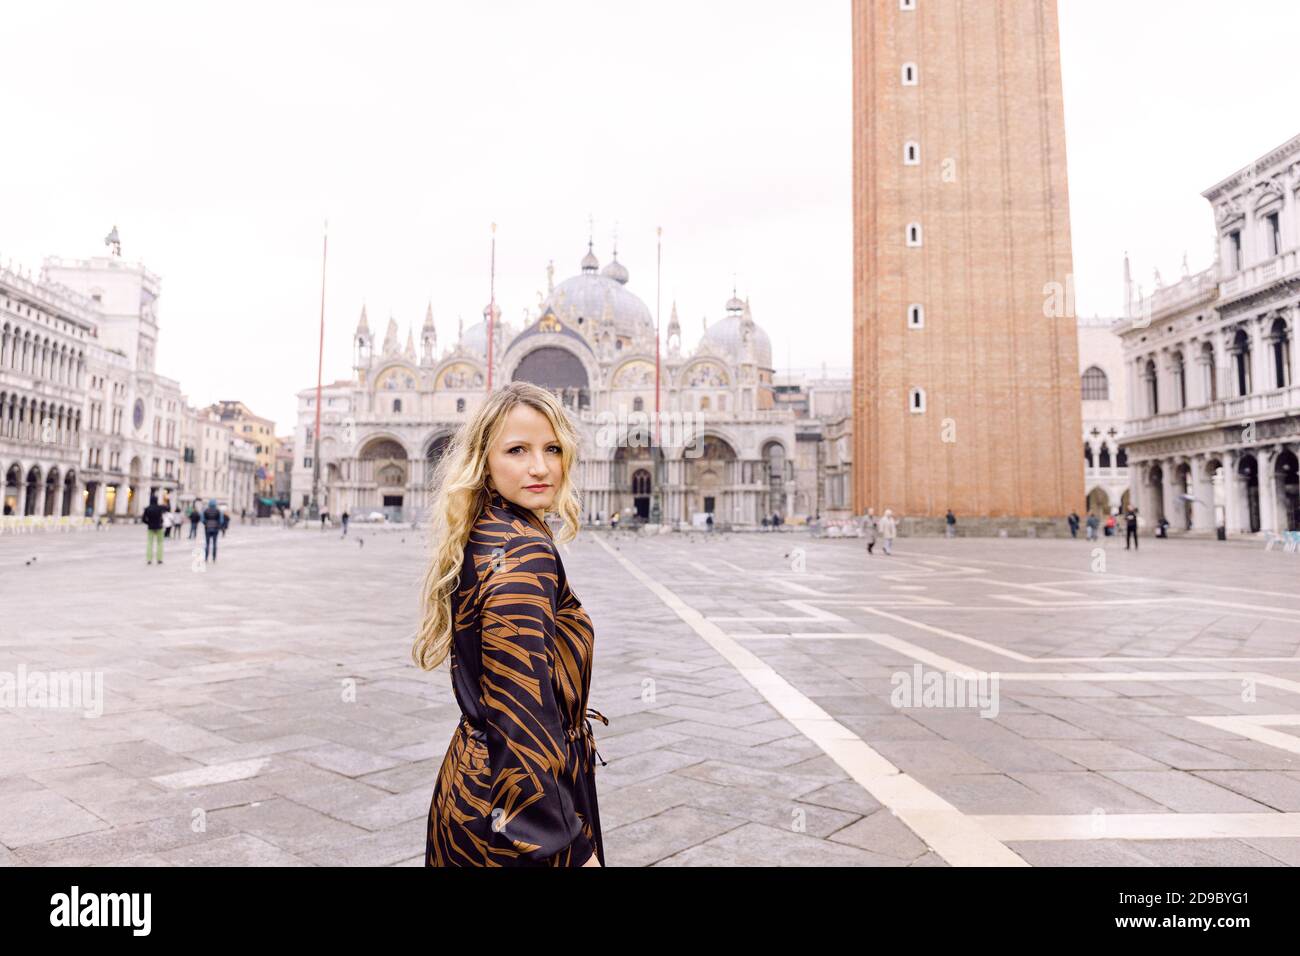 Blonde woman looking at the camera, in a long dark dress walking in Piazza San Marco, Venice, Italy Stock Photo